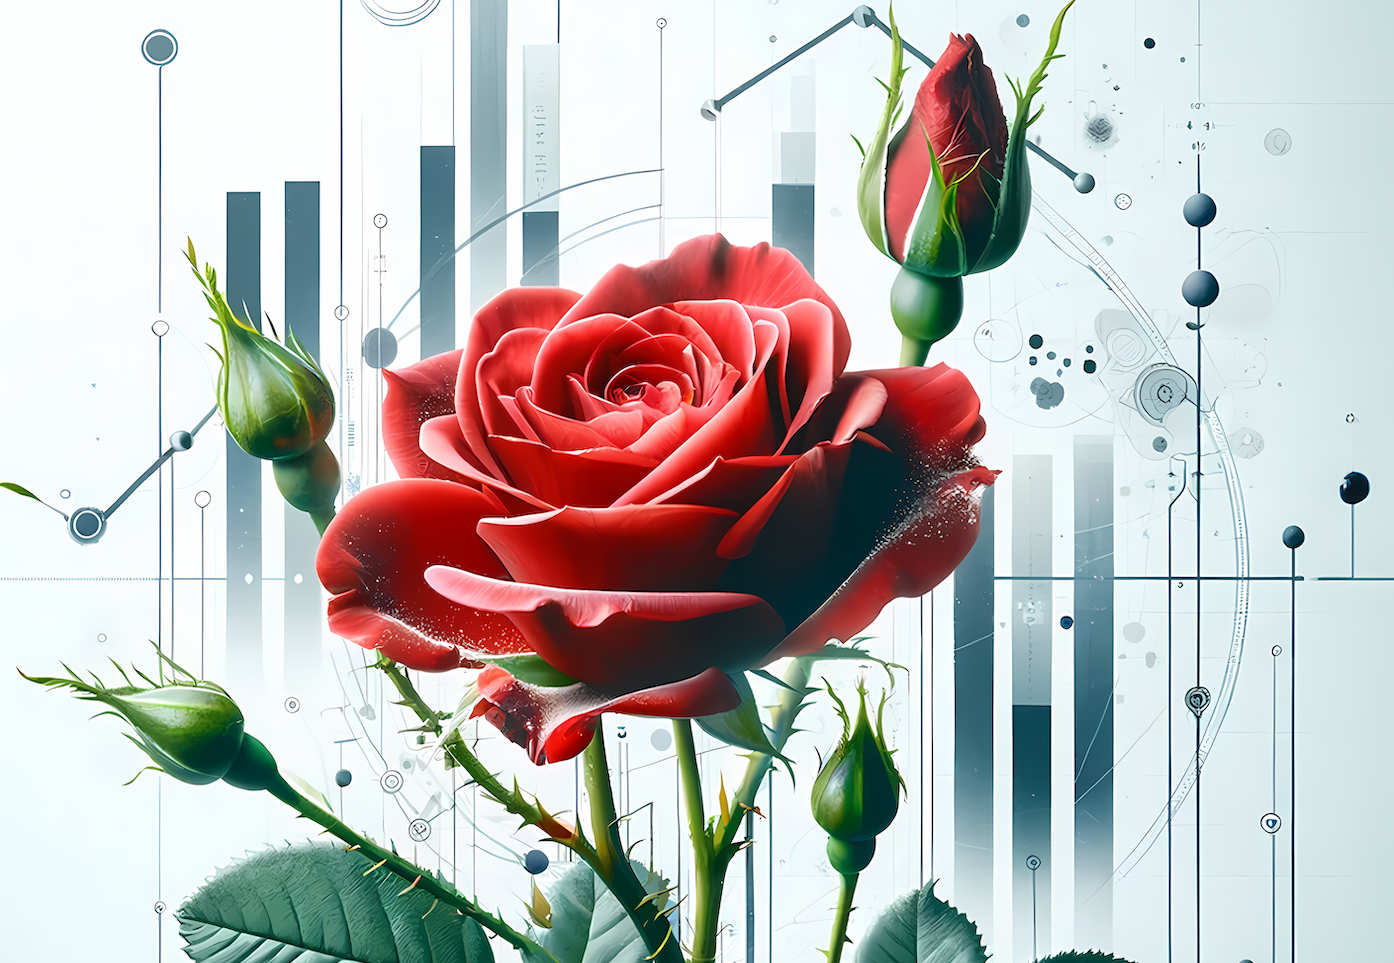 upclose, hyper-surreal styled, vibrant red rose with faded dipictions of various bar charts and abstract data elements in the background